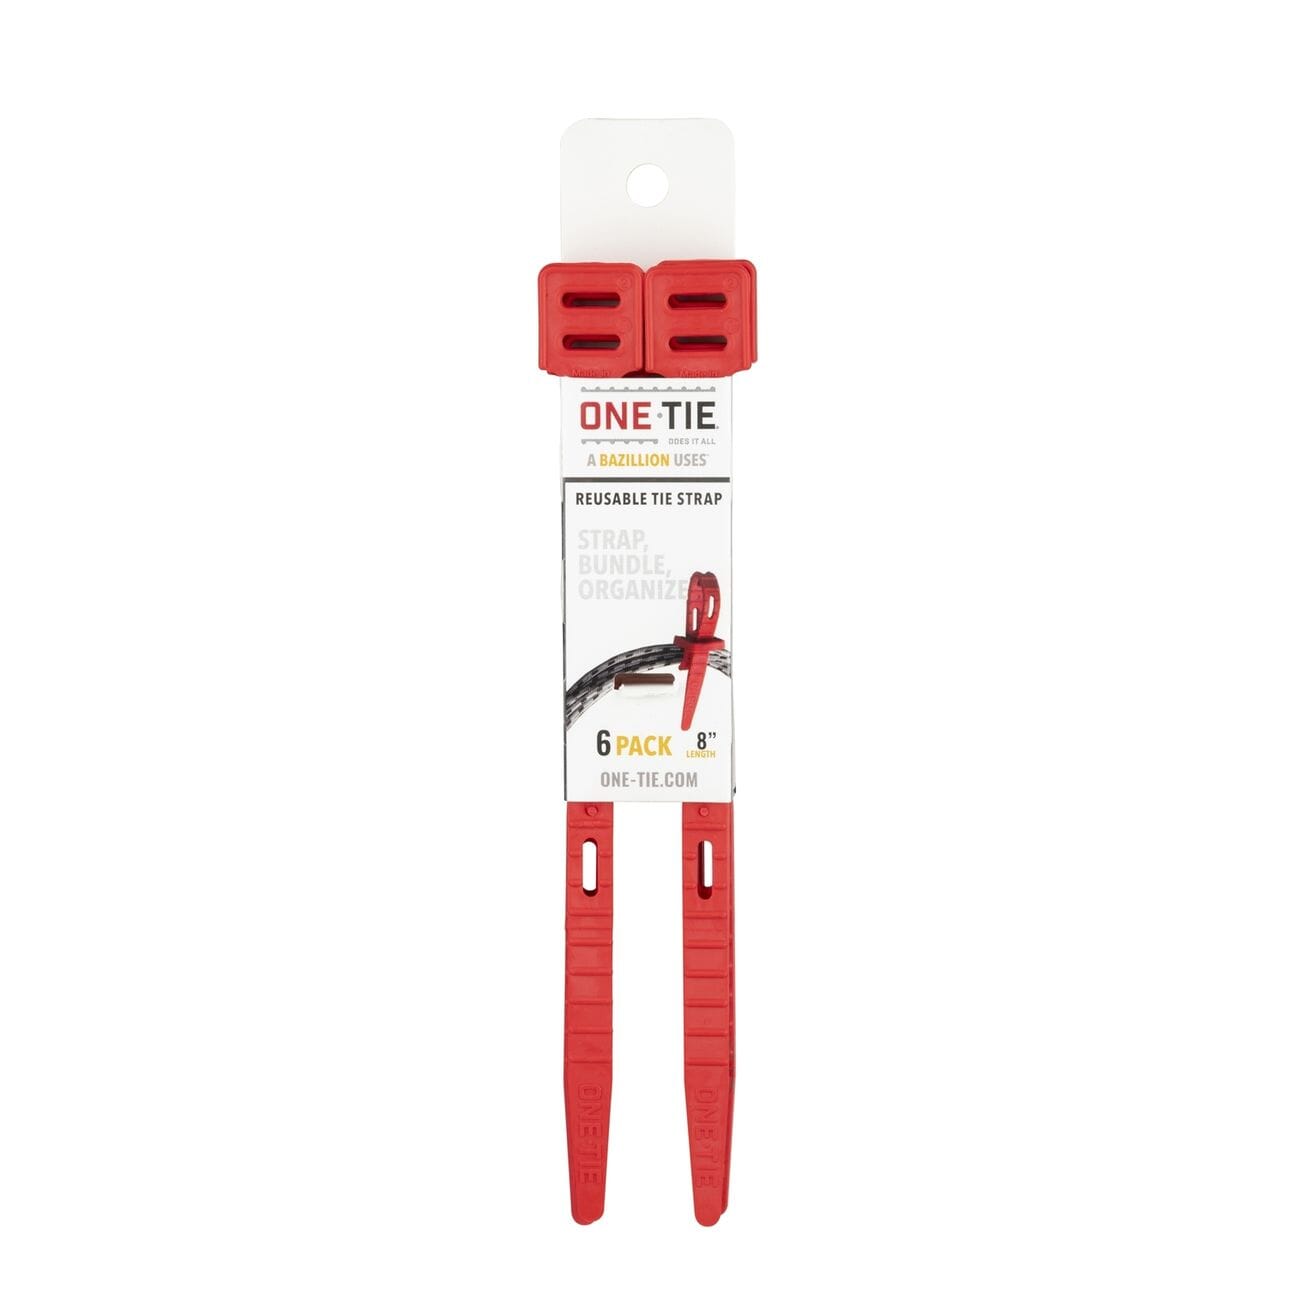 Earls One Tie - Reusable Tie Strap - Red 8" - 6 Pack